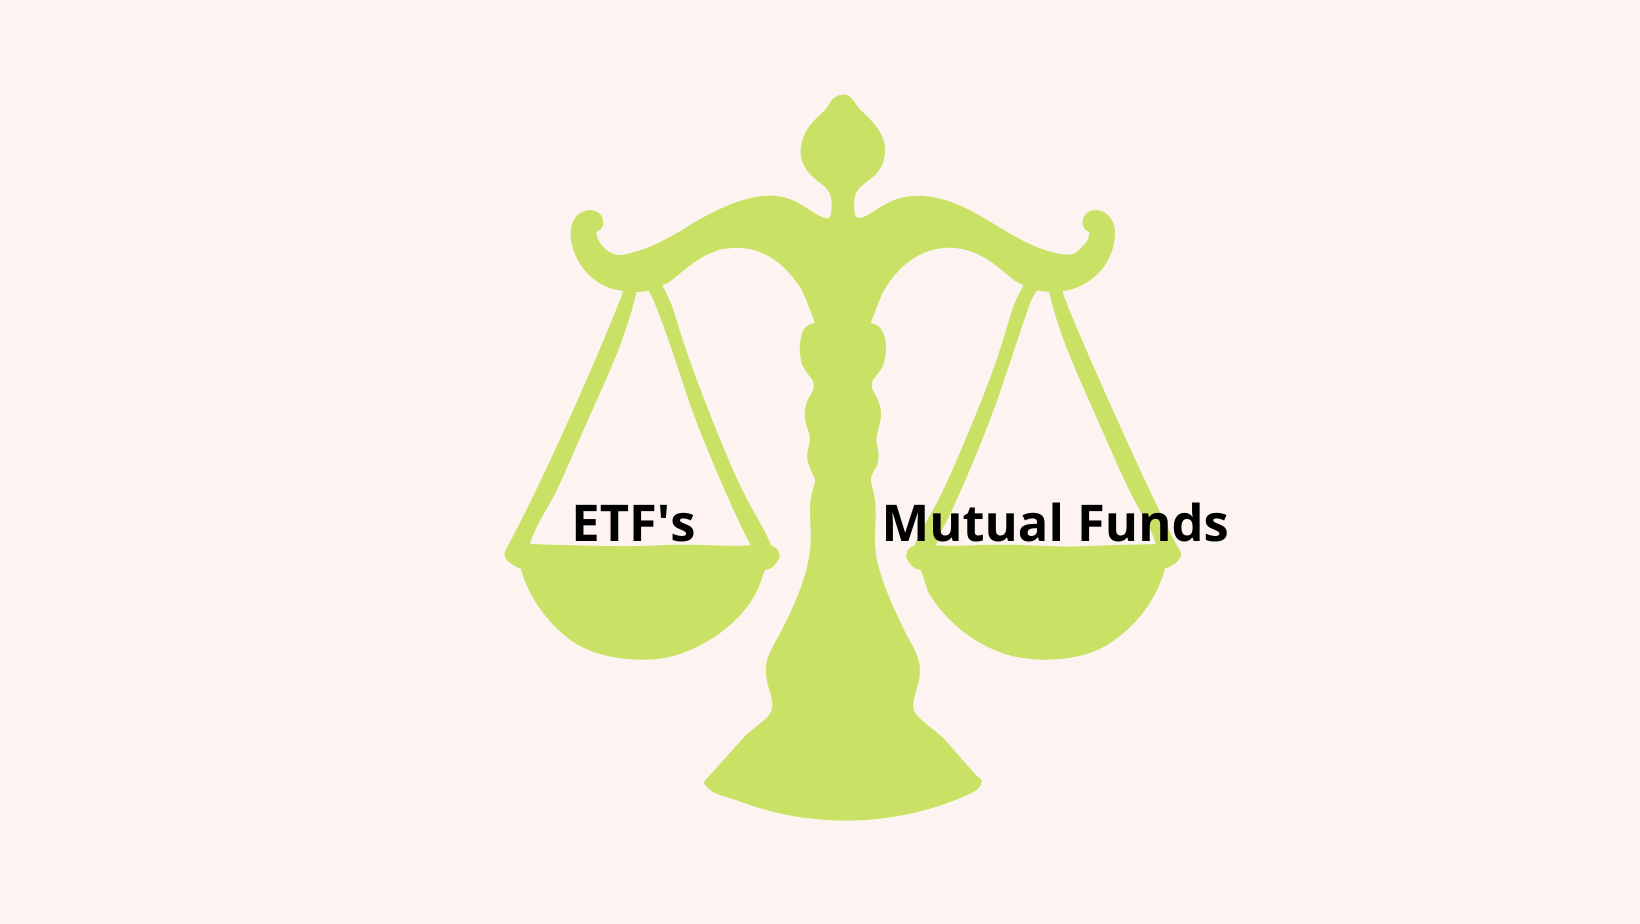 balance and consideration of ETFs versus mutual funds